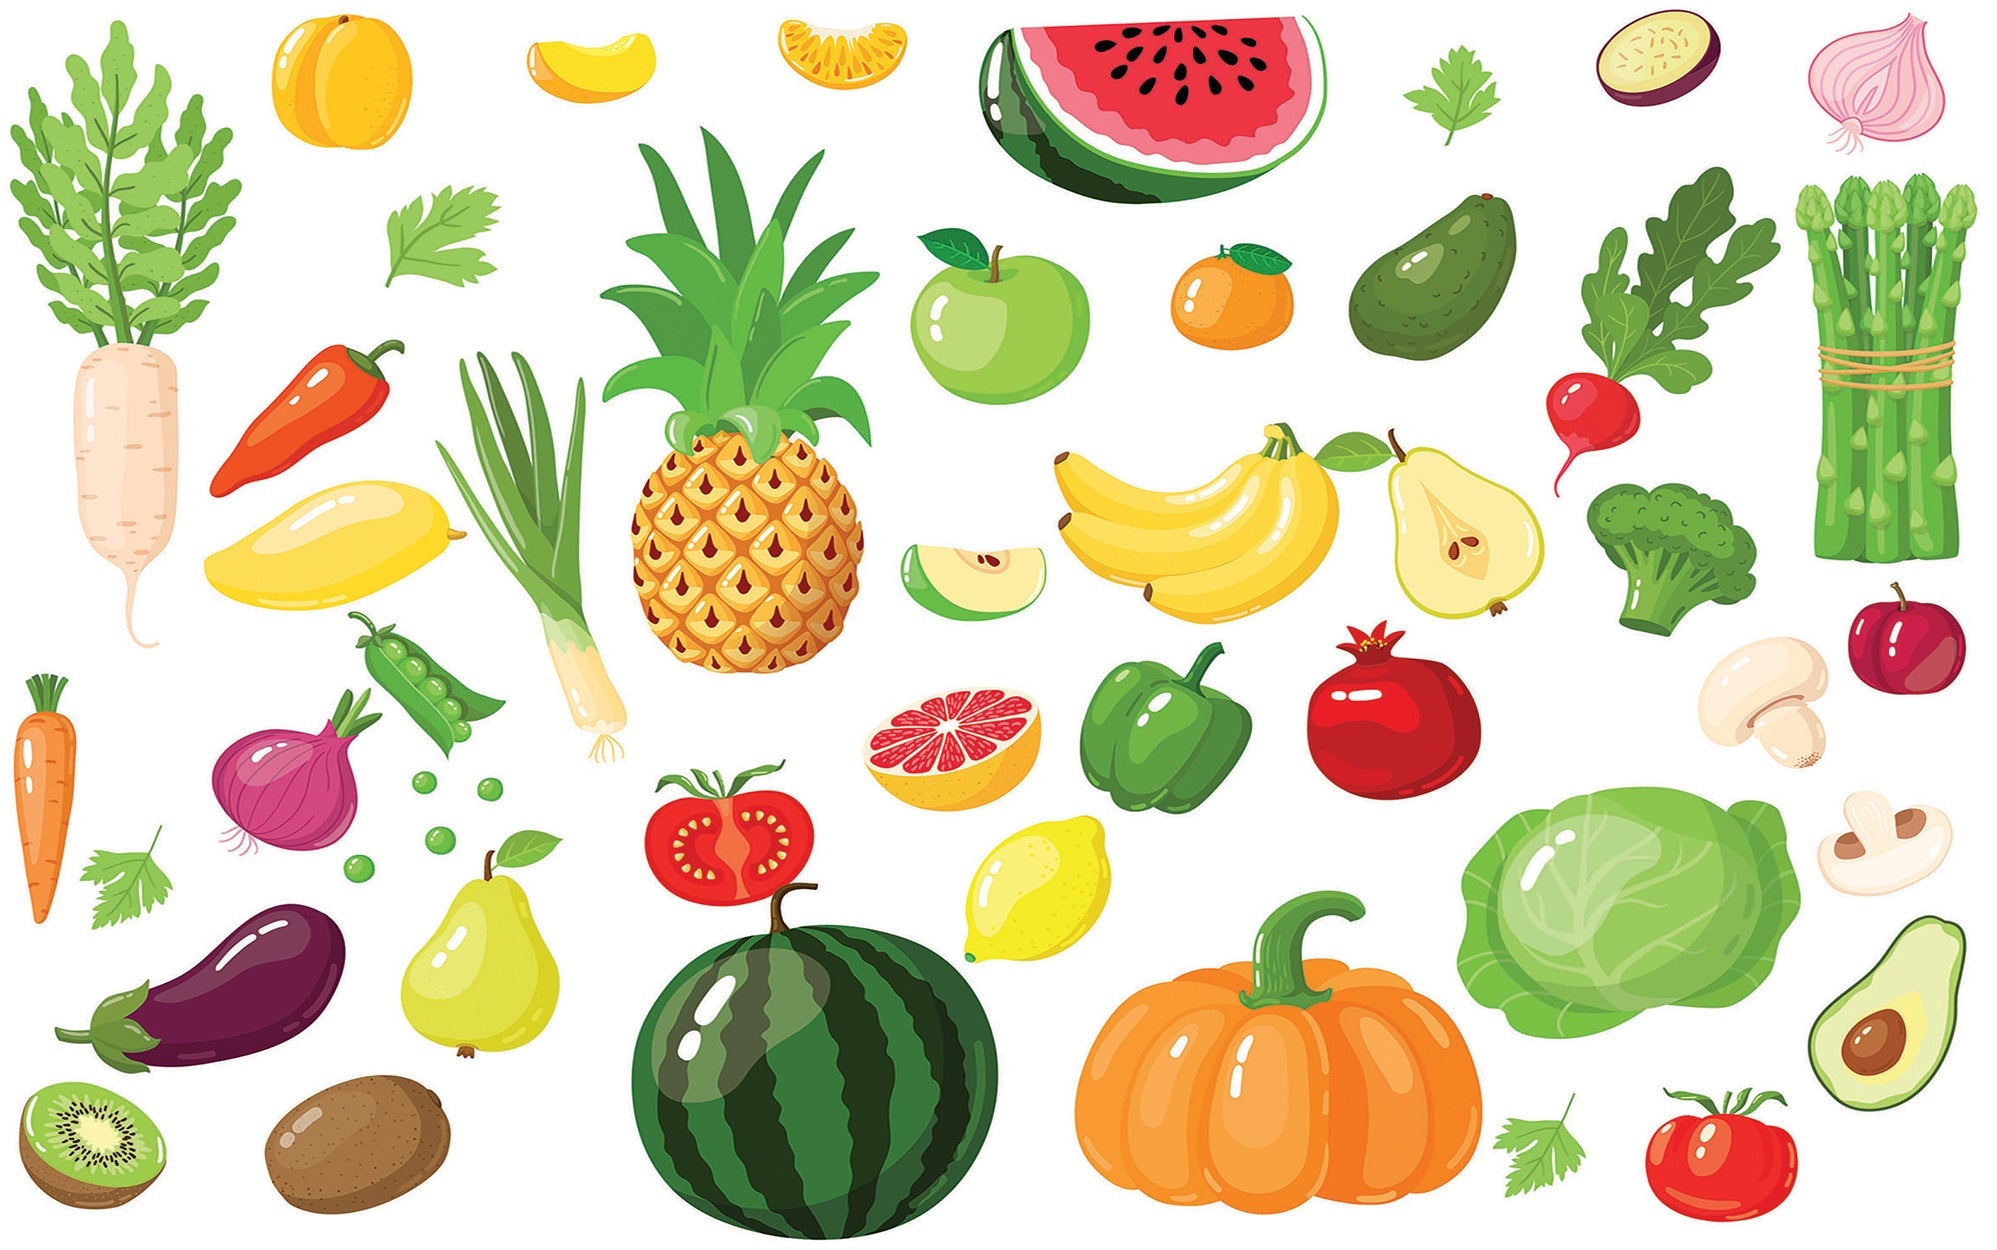 A vibrant selection of illustrated fruits and vegetables as a wall mural in an interior setting